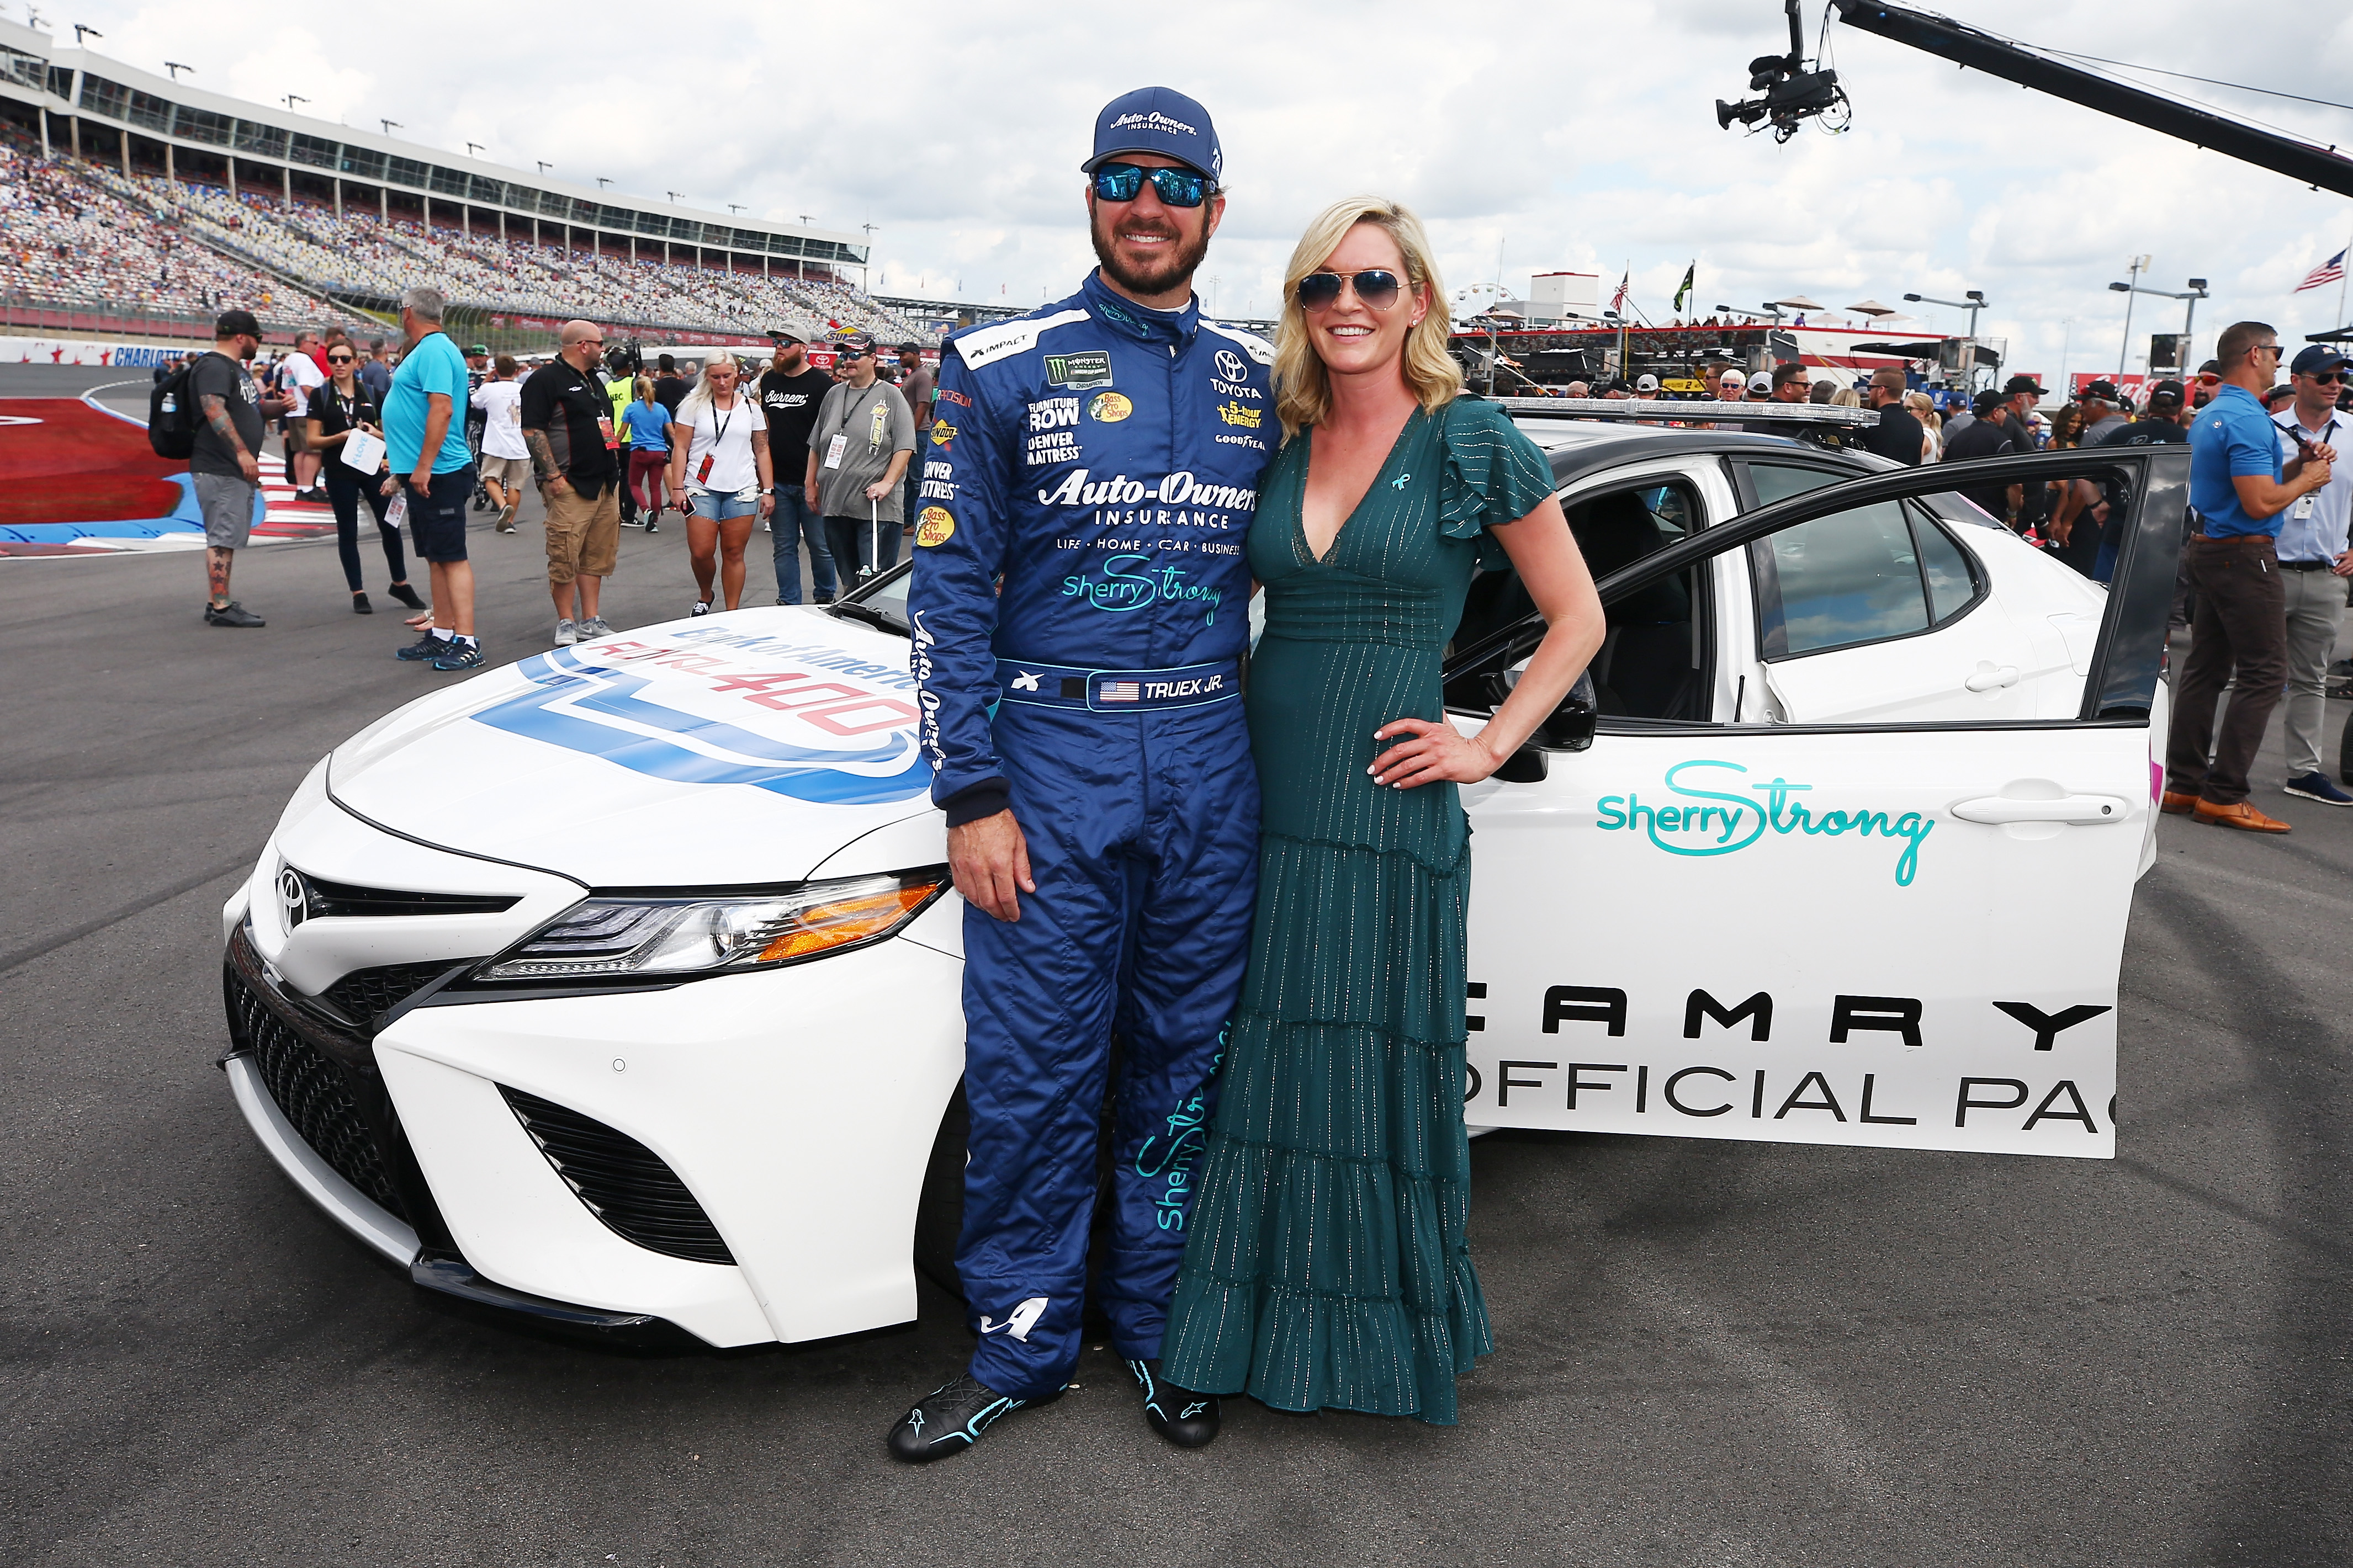 Martin Lee Truex Jr. and Sherry Pollex at the Monster Energy NASCAR Cup Series Bank of America Roval 400 on September 30, 2018, in Charlotte | Source: Getty Images